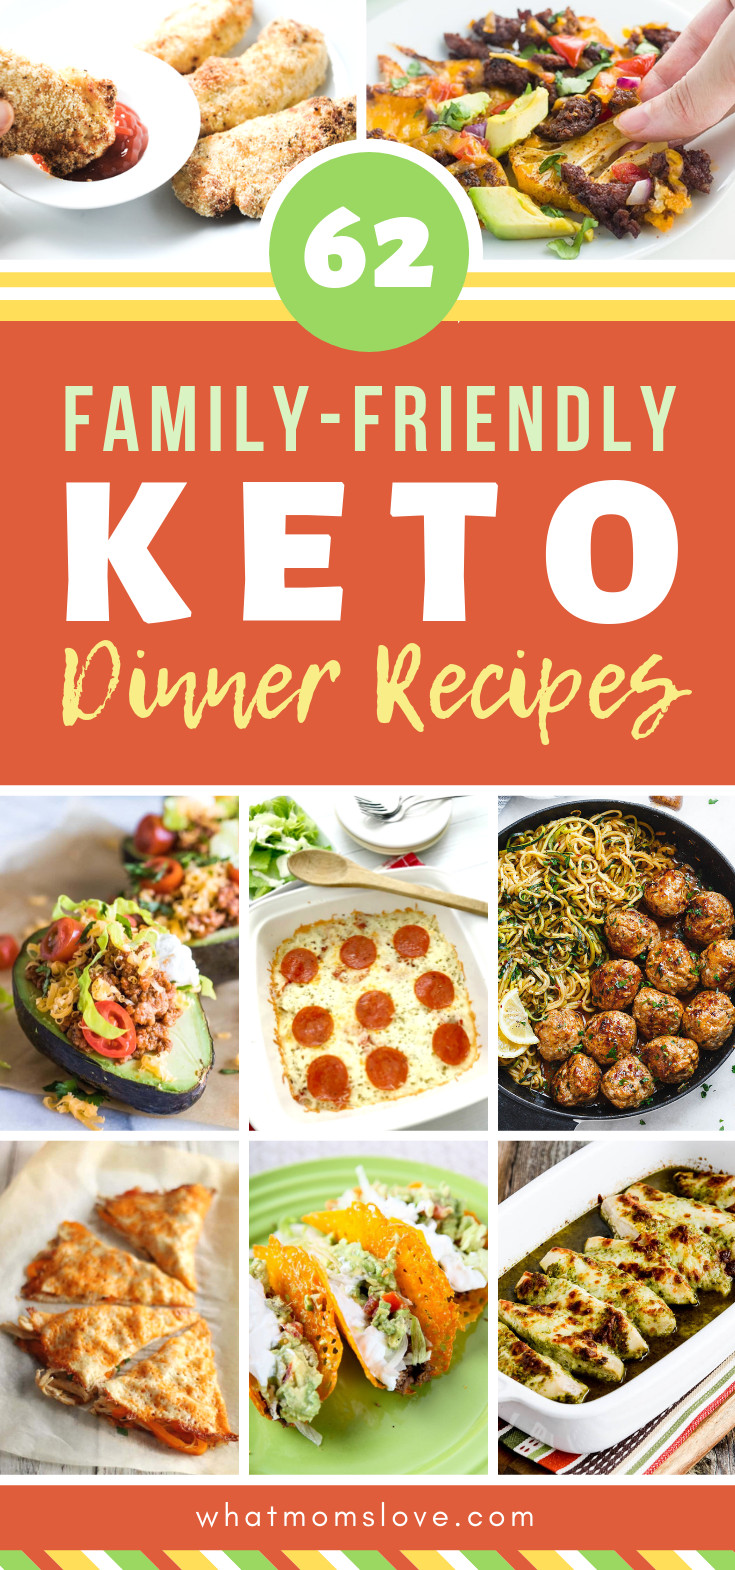 Kid Friendly Keto Dinners
 60 Kid Friendly Keto Dinner Recipes Your Entire Family